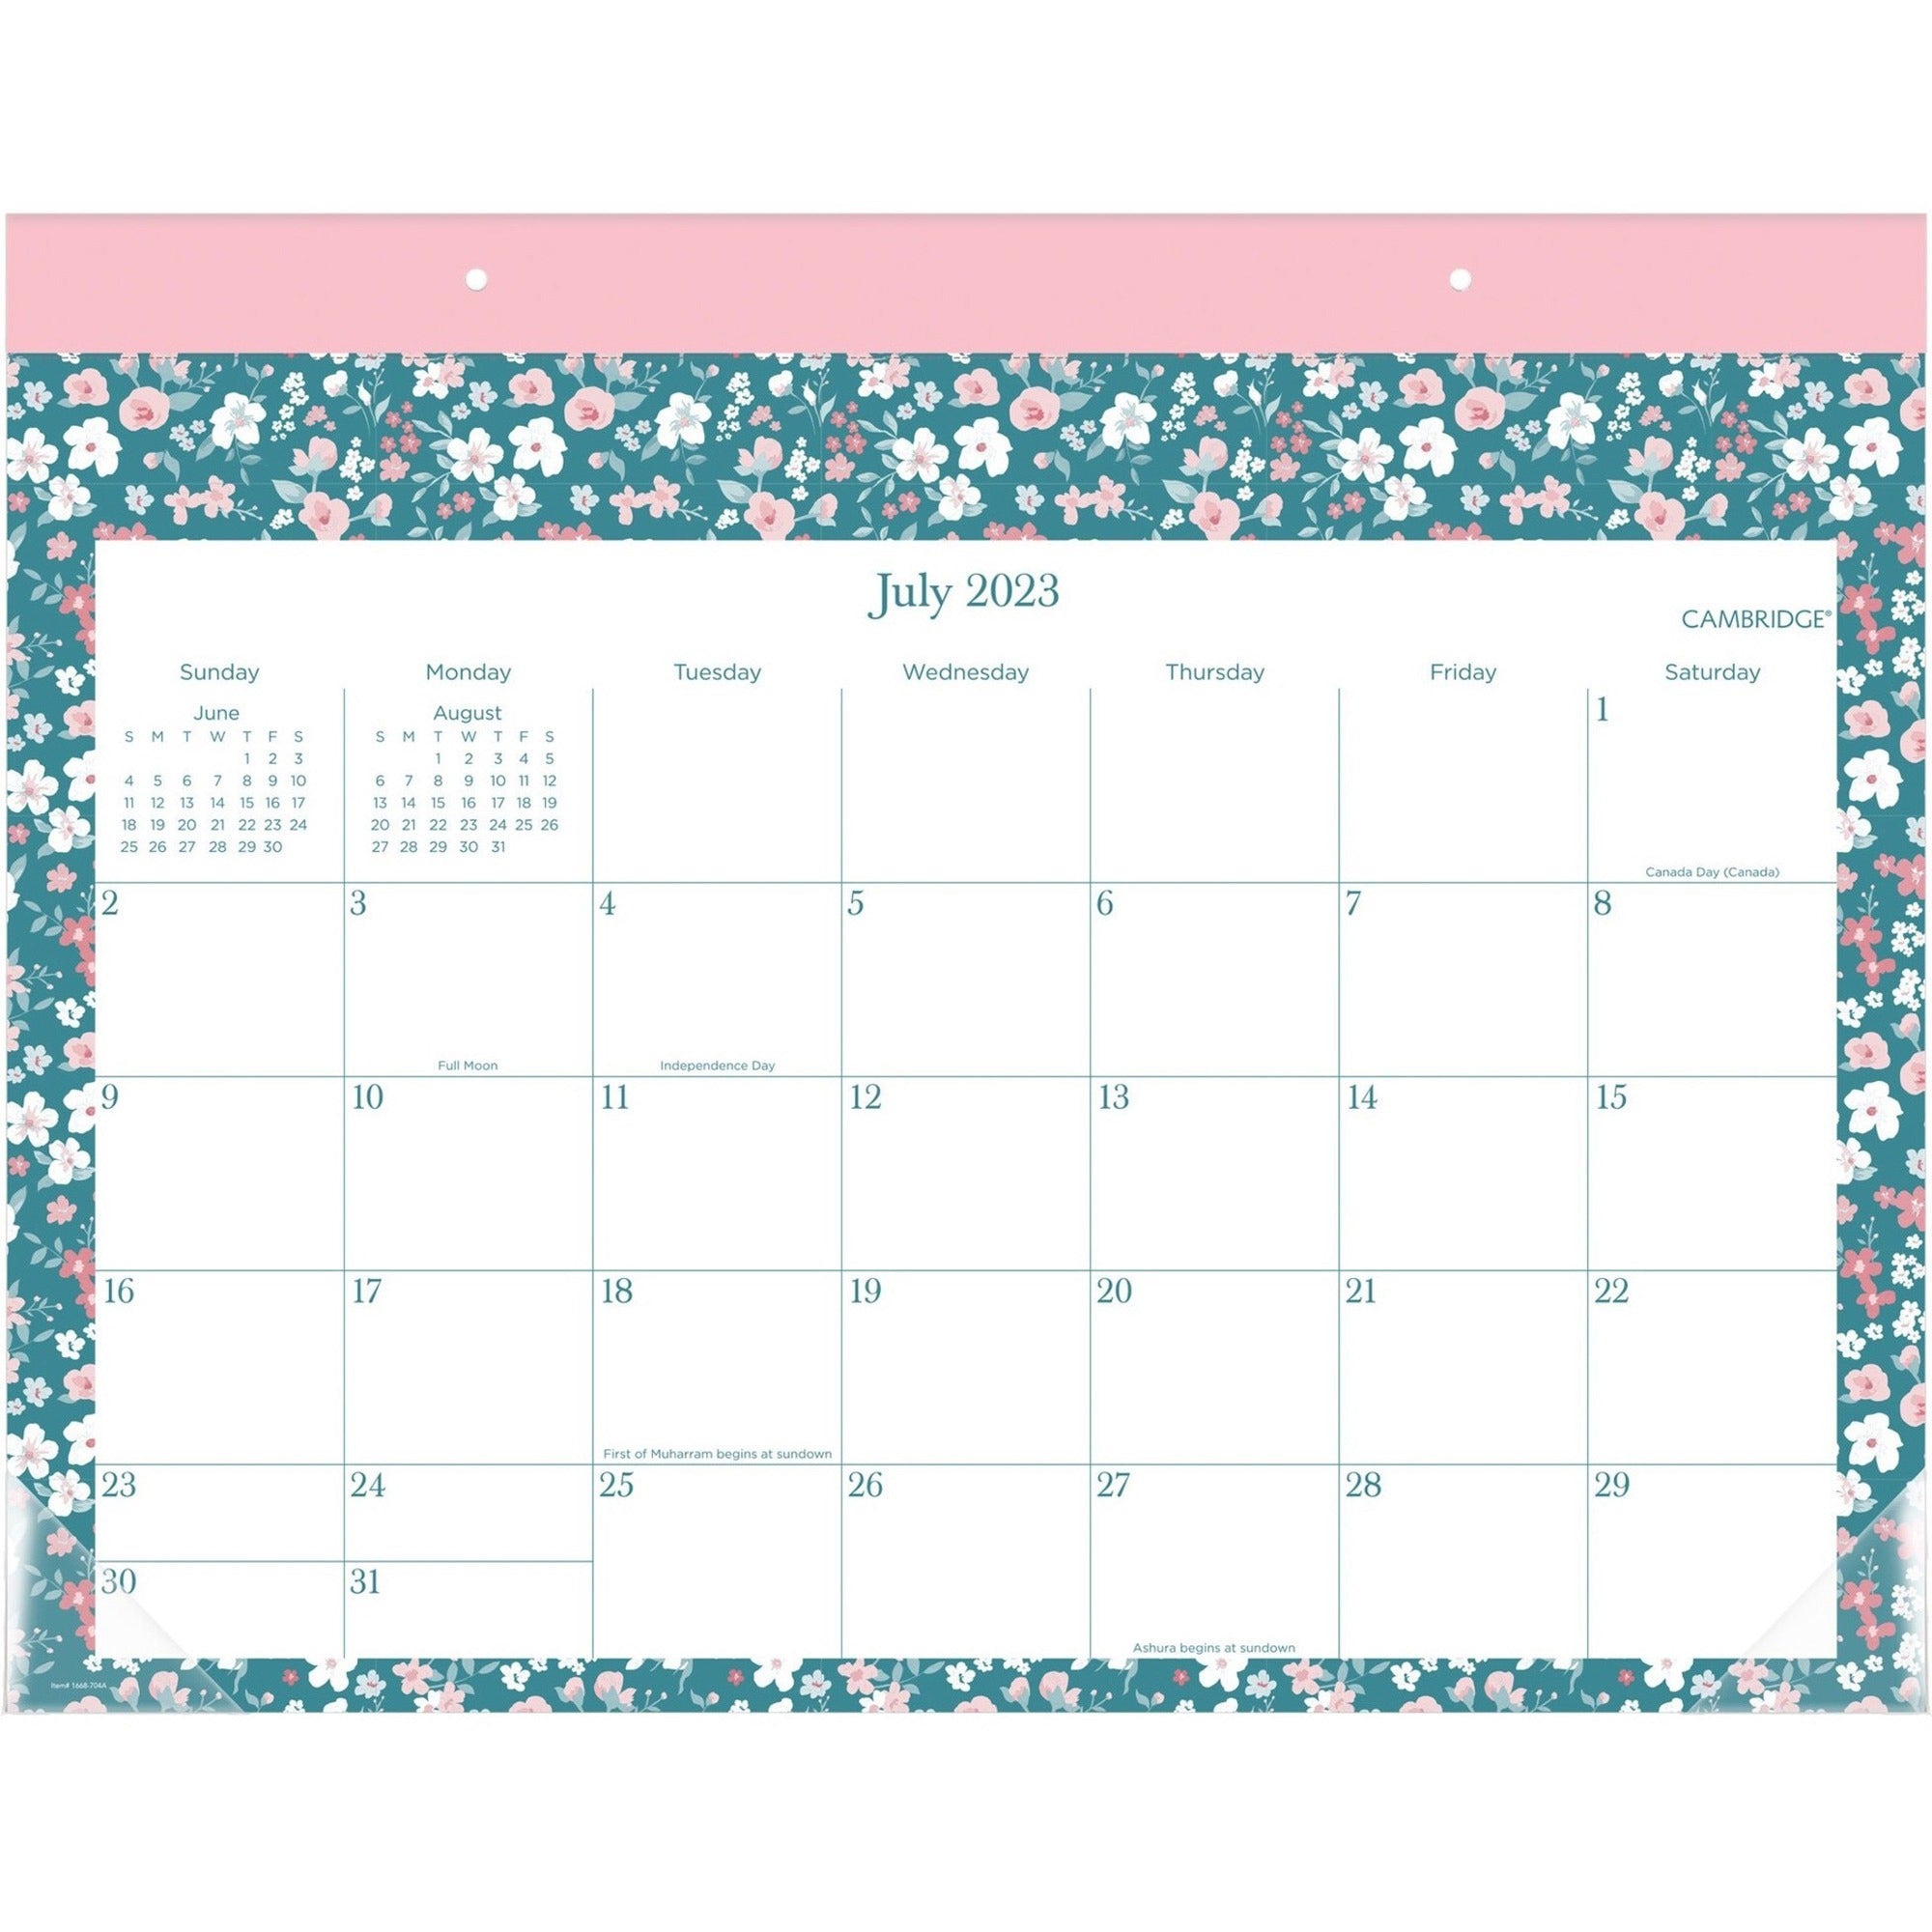 cambridge-pippa-academic-desk-pad-calendar-academic-monthly-12-month-july-2023-june-2024-1-month-single-page-layout-17-x-21-3-4-sheet-size-275-x-225-block-headband-desk-pad-blue-green-pink-unruled-daily-block-referenc_aag1668704a - 1